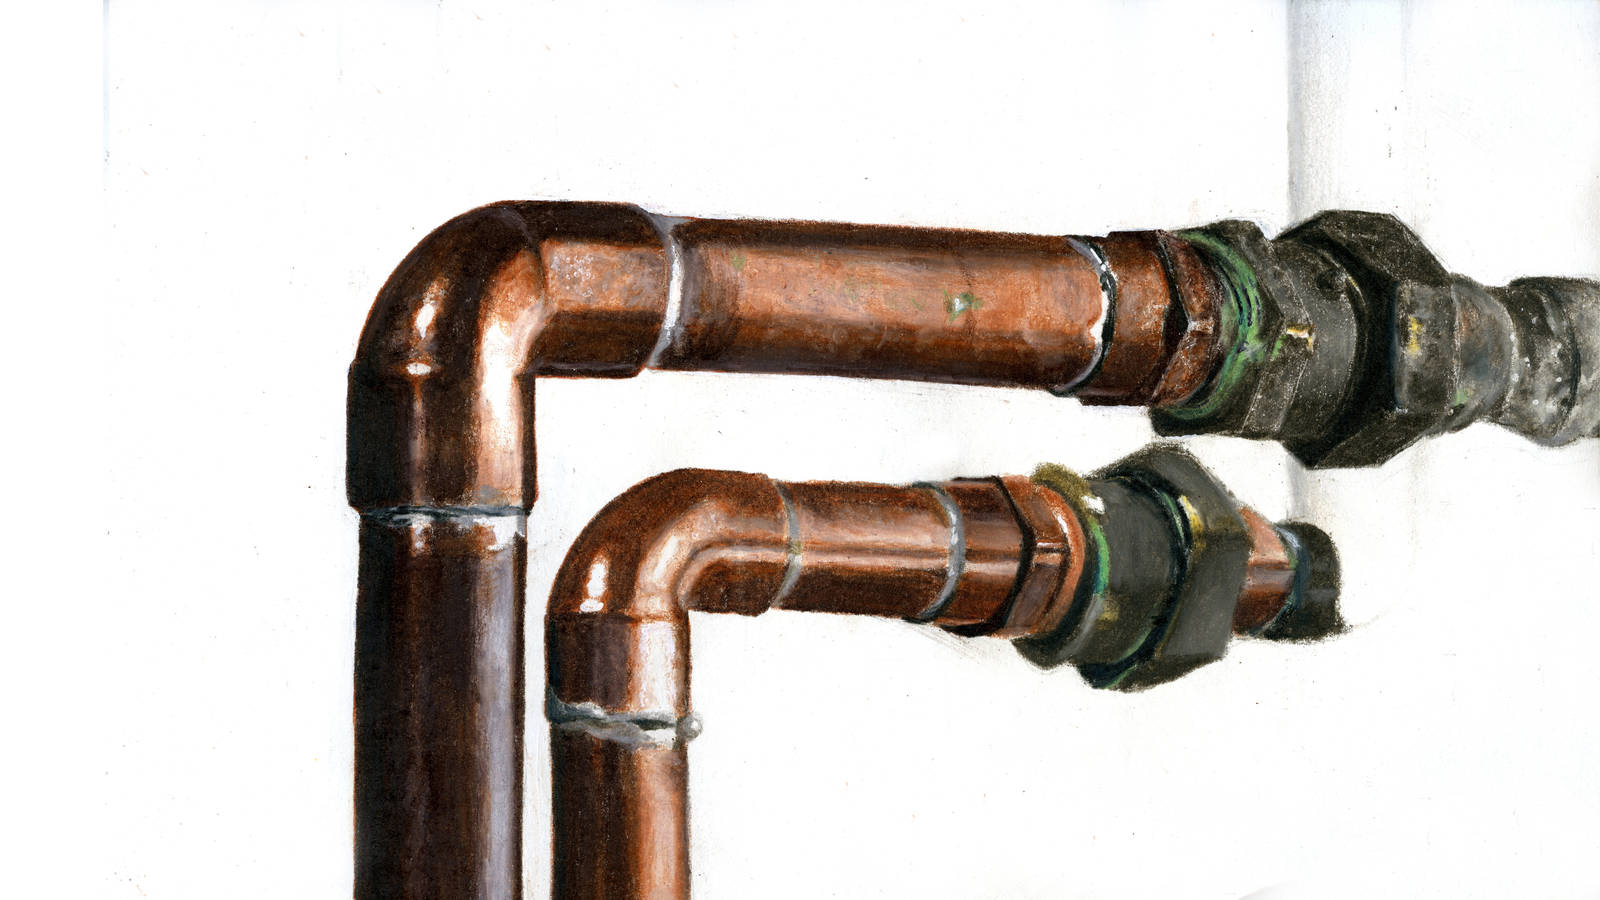 <h3 style="text-align: center; padding: 50px;"><span class="text-Intro-style">Copper pipes located in the caretaker's house at Weir Farm National Historic Site. Colored pencil on paper, 2016.</span></h3>